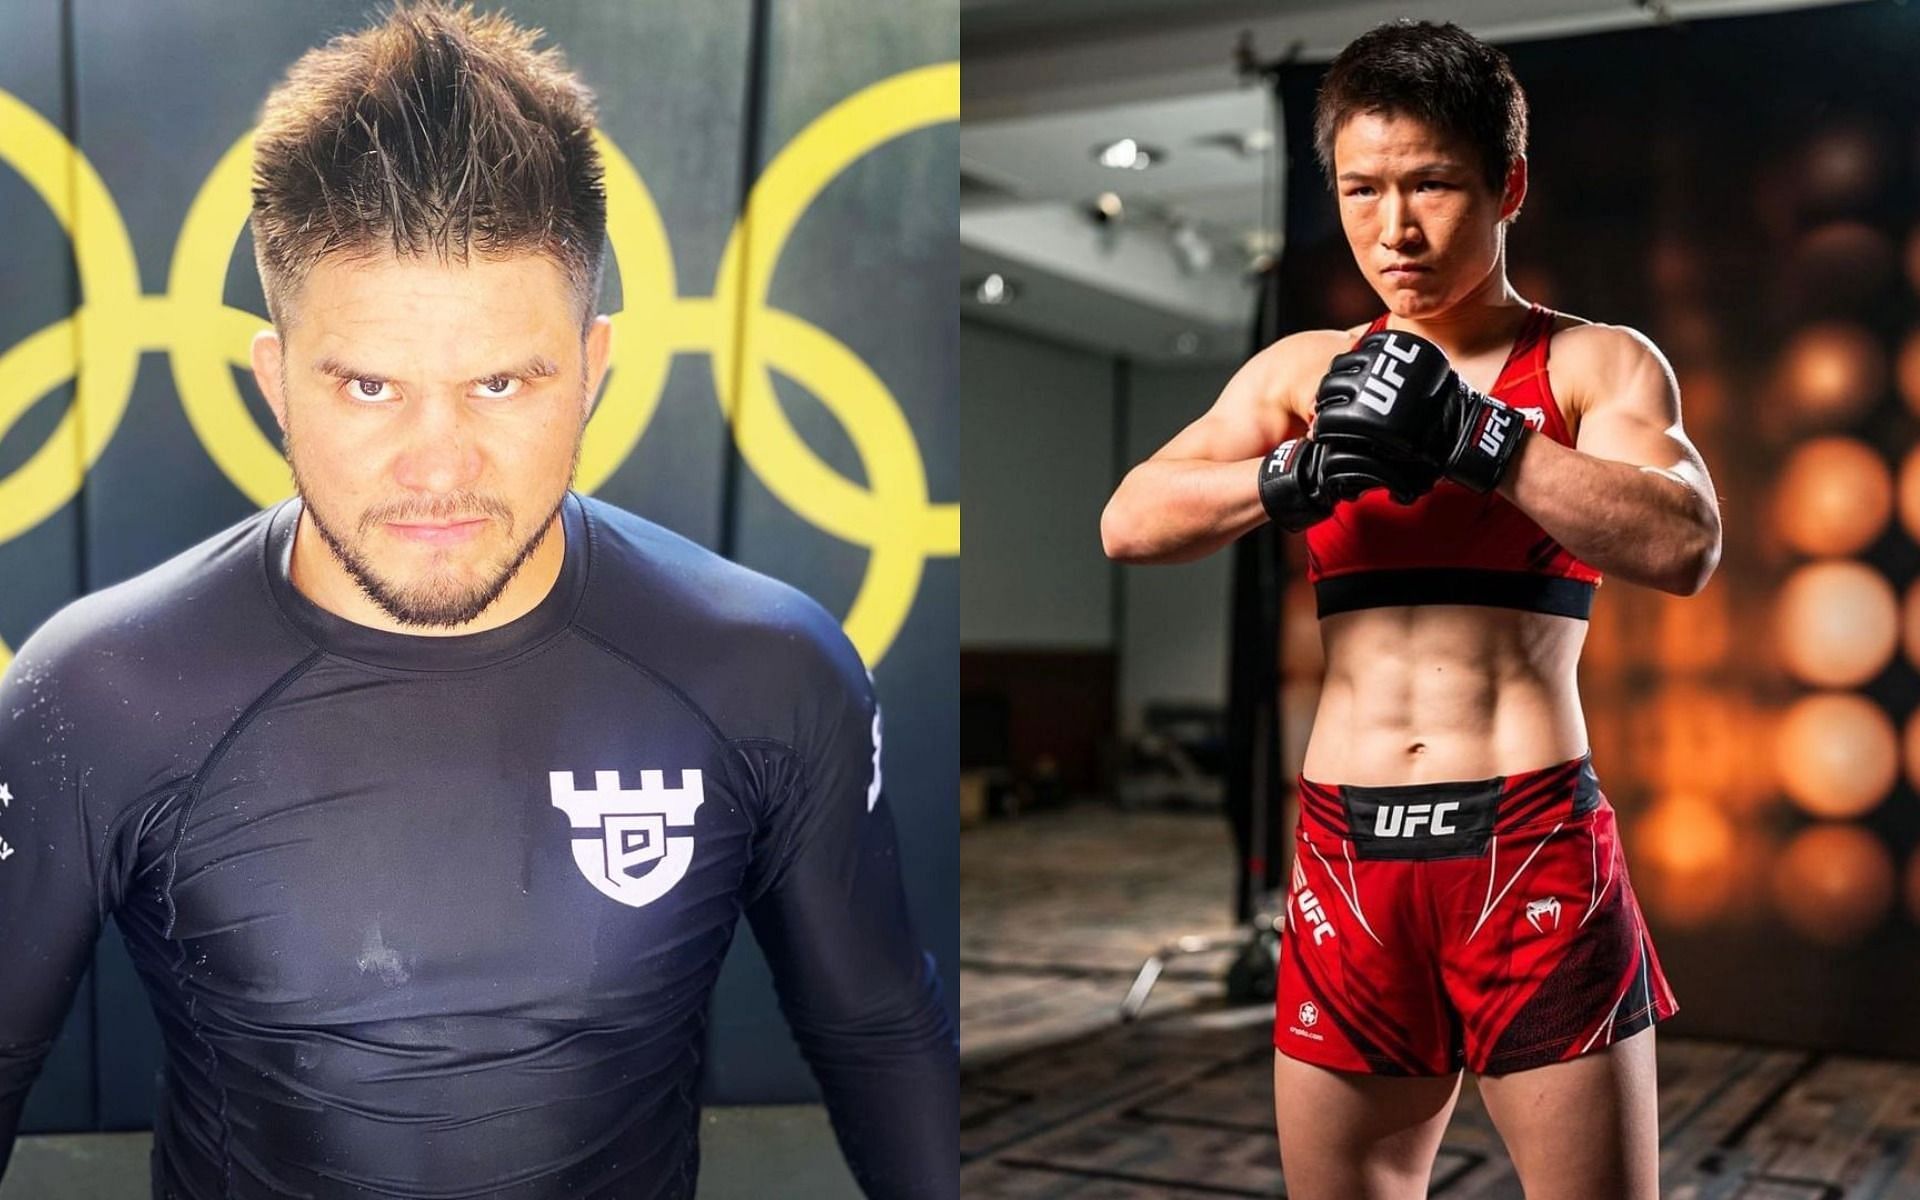 Henry Cejudo (left), Zhang Weili (right) [Images courtesy: @henry_cejudo @zhangweilimma on Instagram]